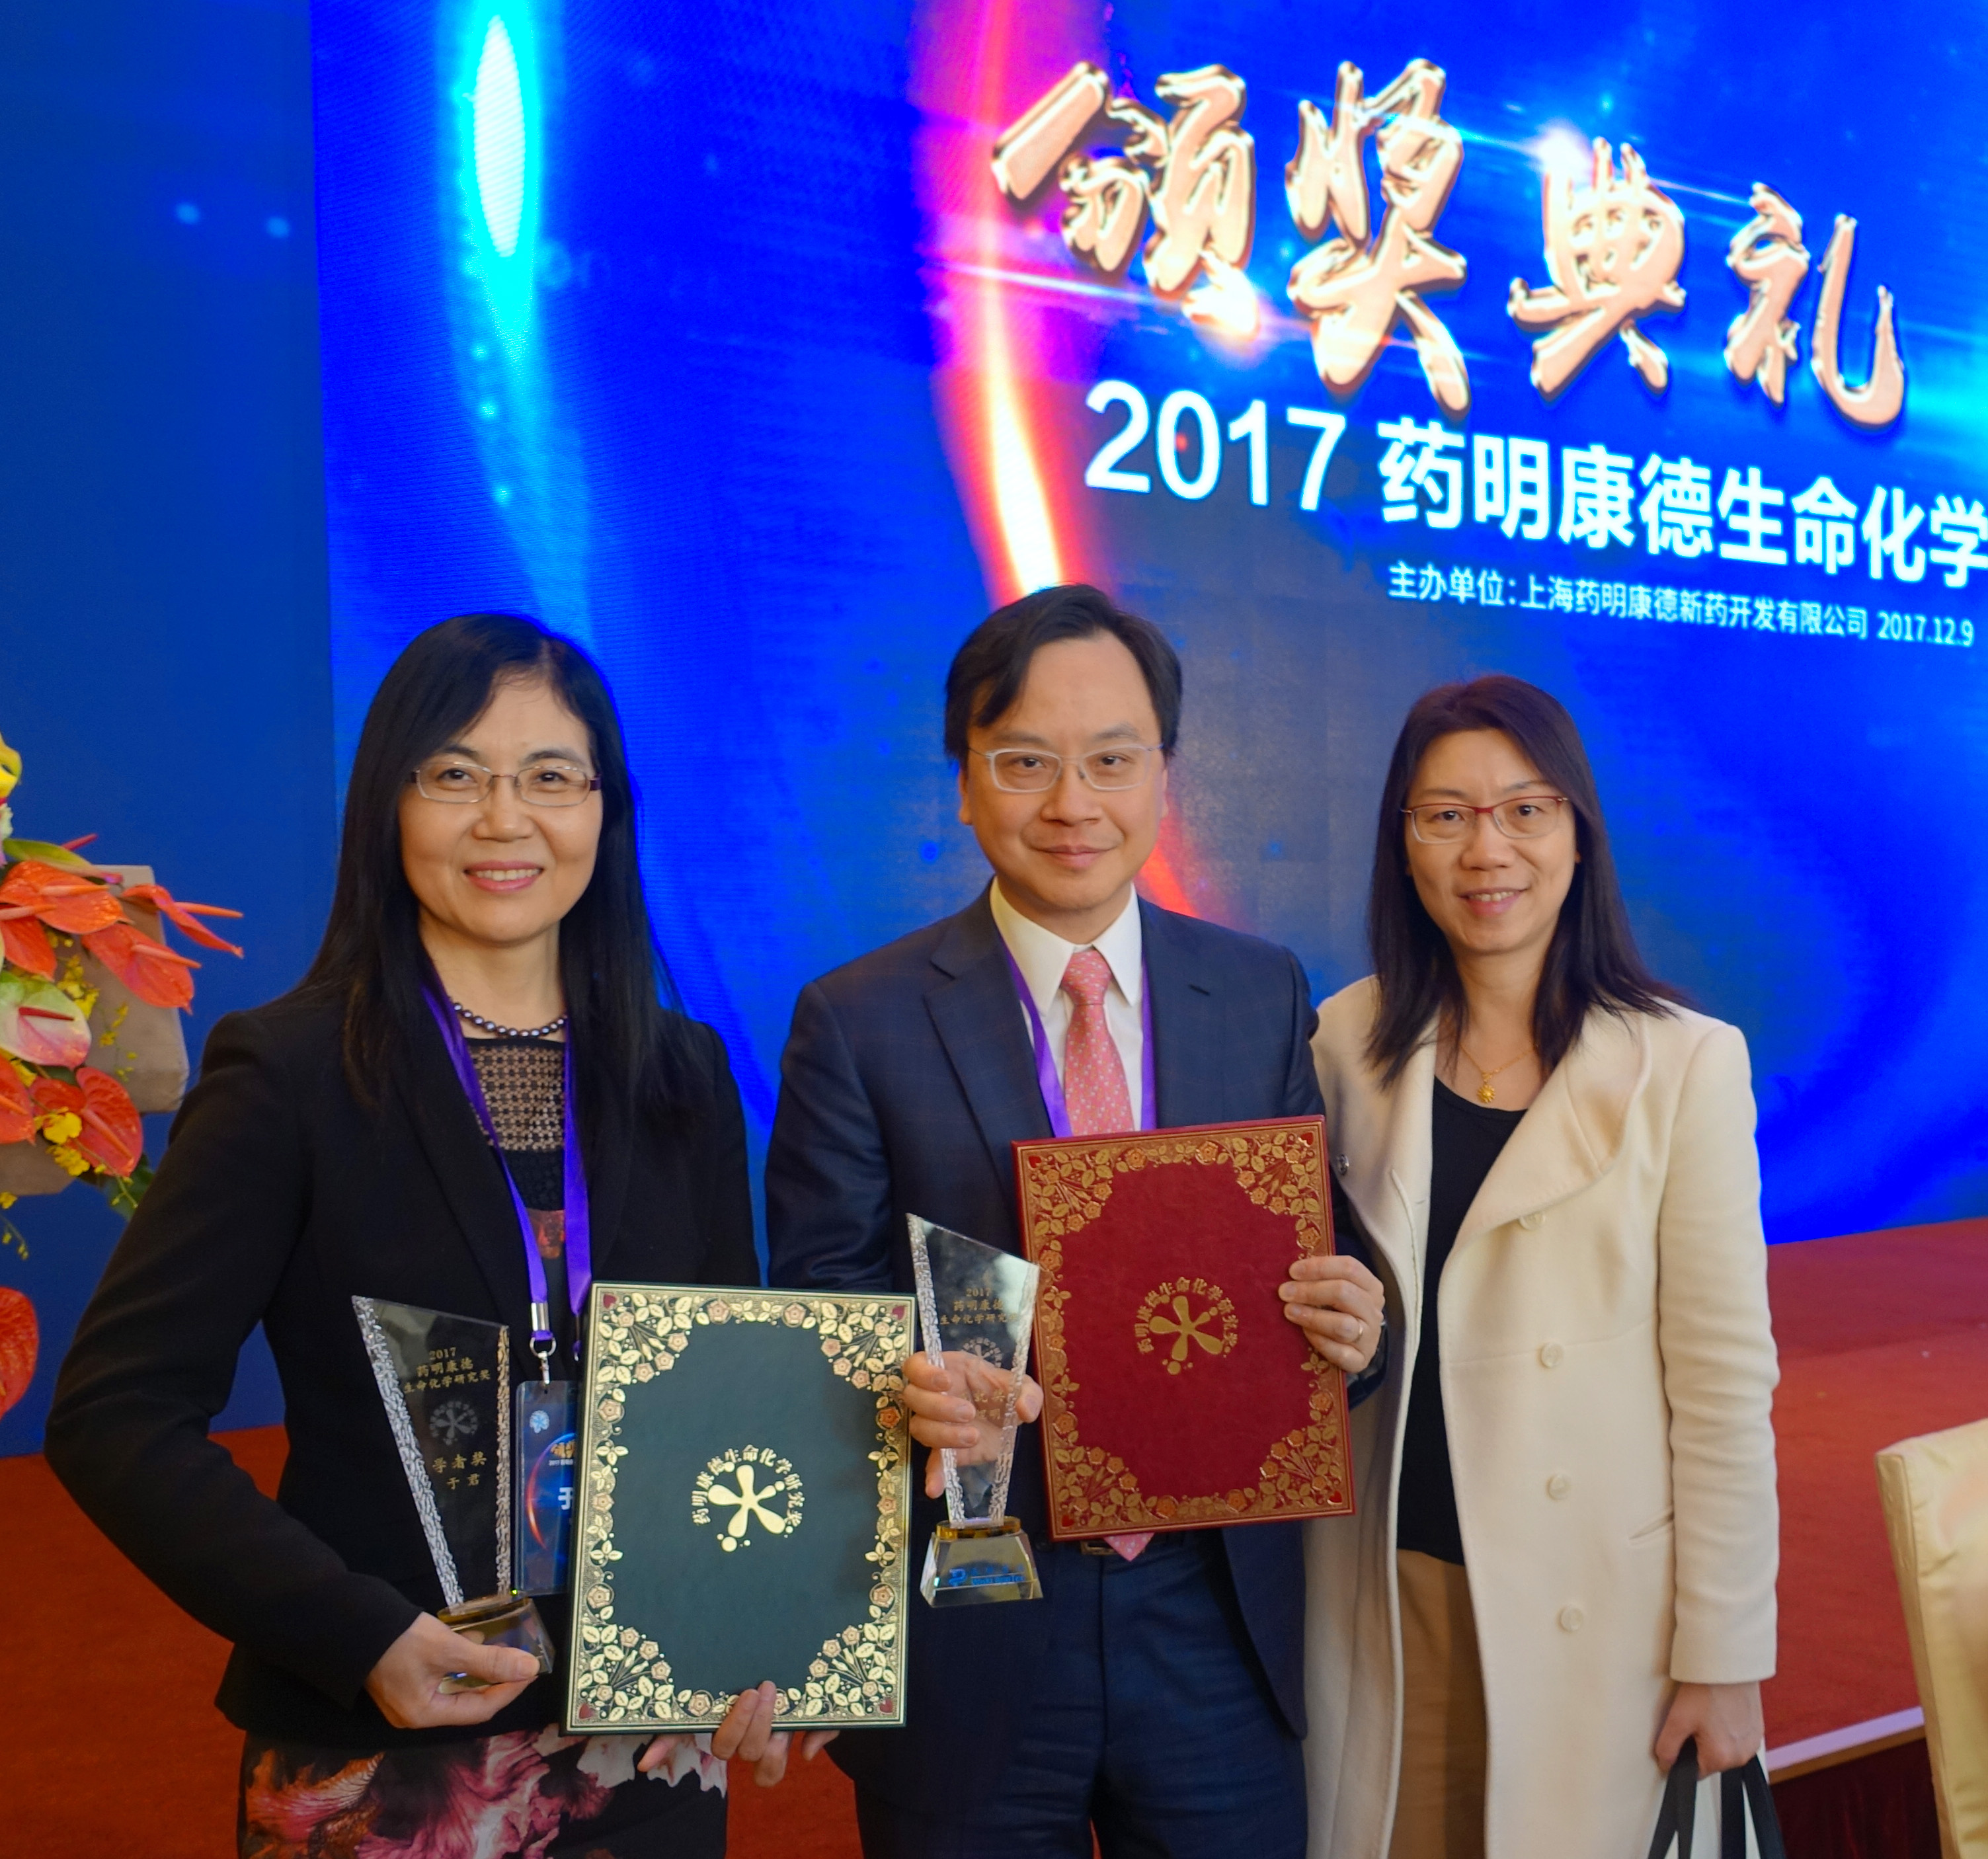 (Centre) Prof. Dennis LO and (left) Prof. Jun YU from the Faculty of Medicine at CUHK receive “Outstanding Achievements Award” and “Scholar Award” in the 11th annual WuXi PharmaTech Life Science and Chemistry Awards respectively for their exceptional contributions in the field of life science and chemistry. Featured on the right is Dr Alice Wong, wife of Prof Dennis Lo.